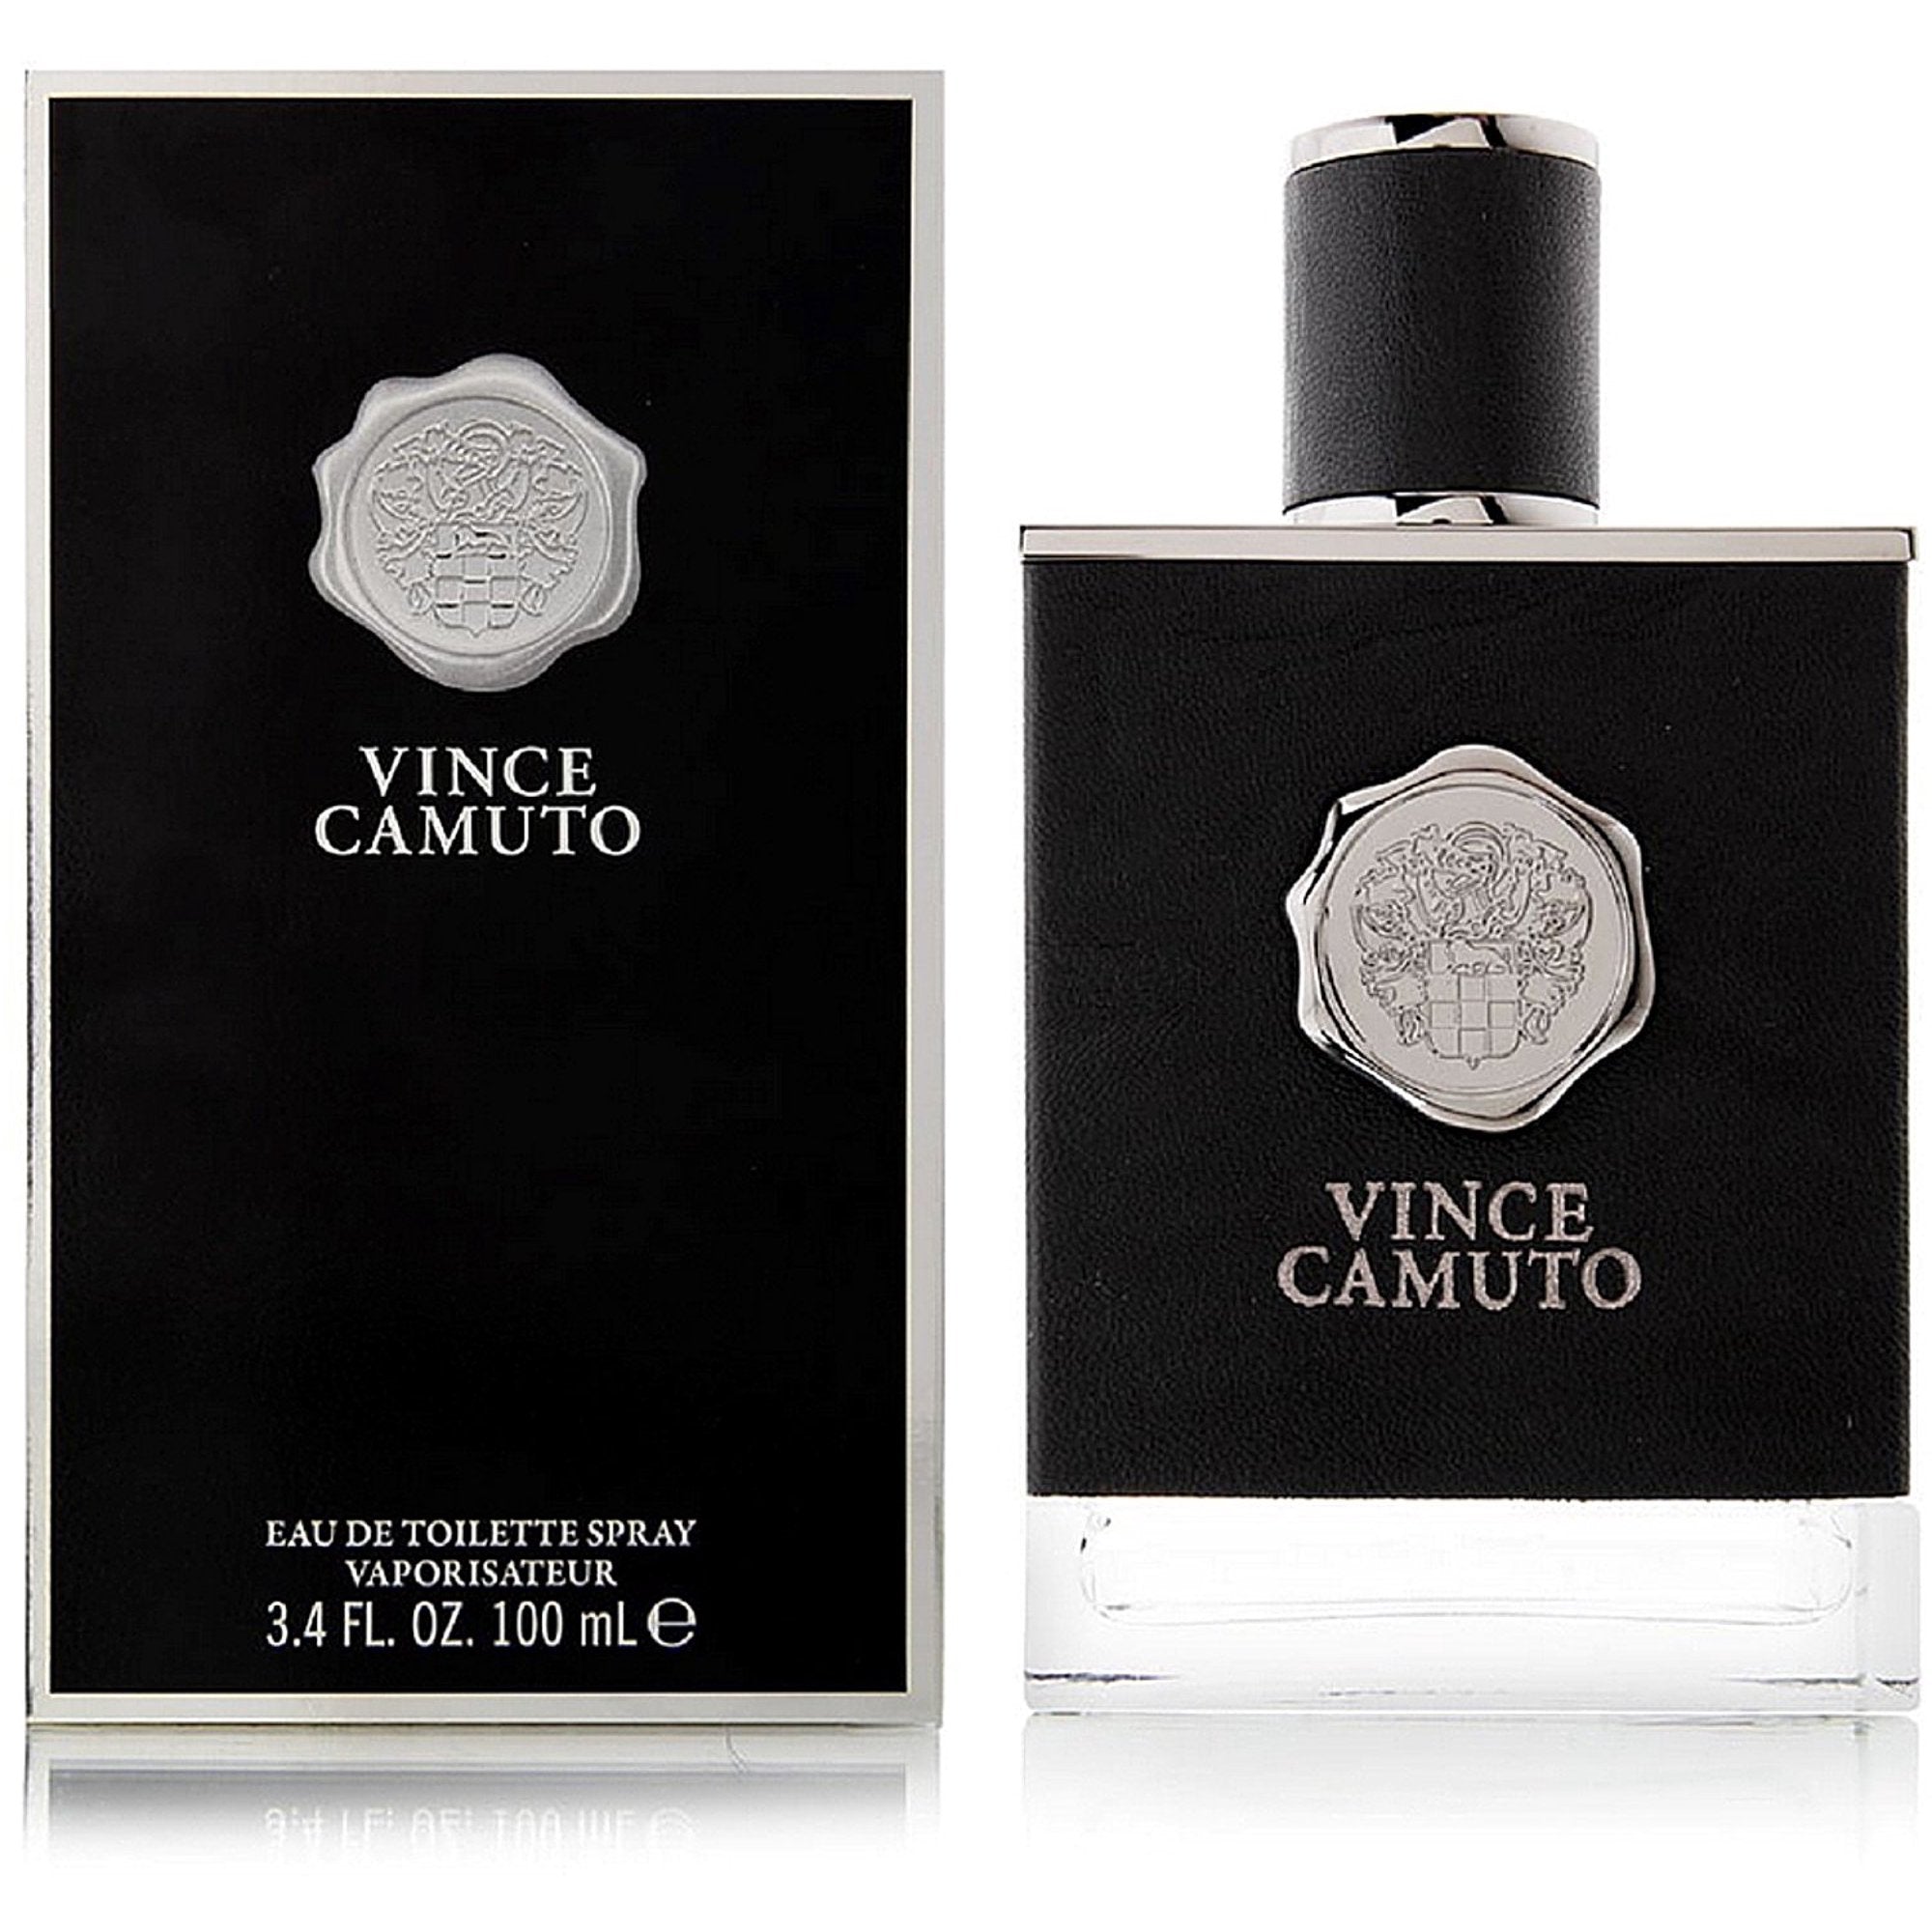 Vince Camuto by Vince Camuto 3.4 oz EDT Spray M